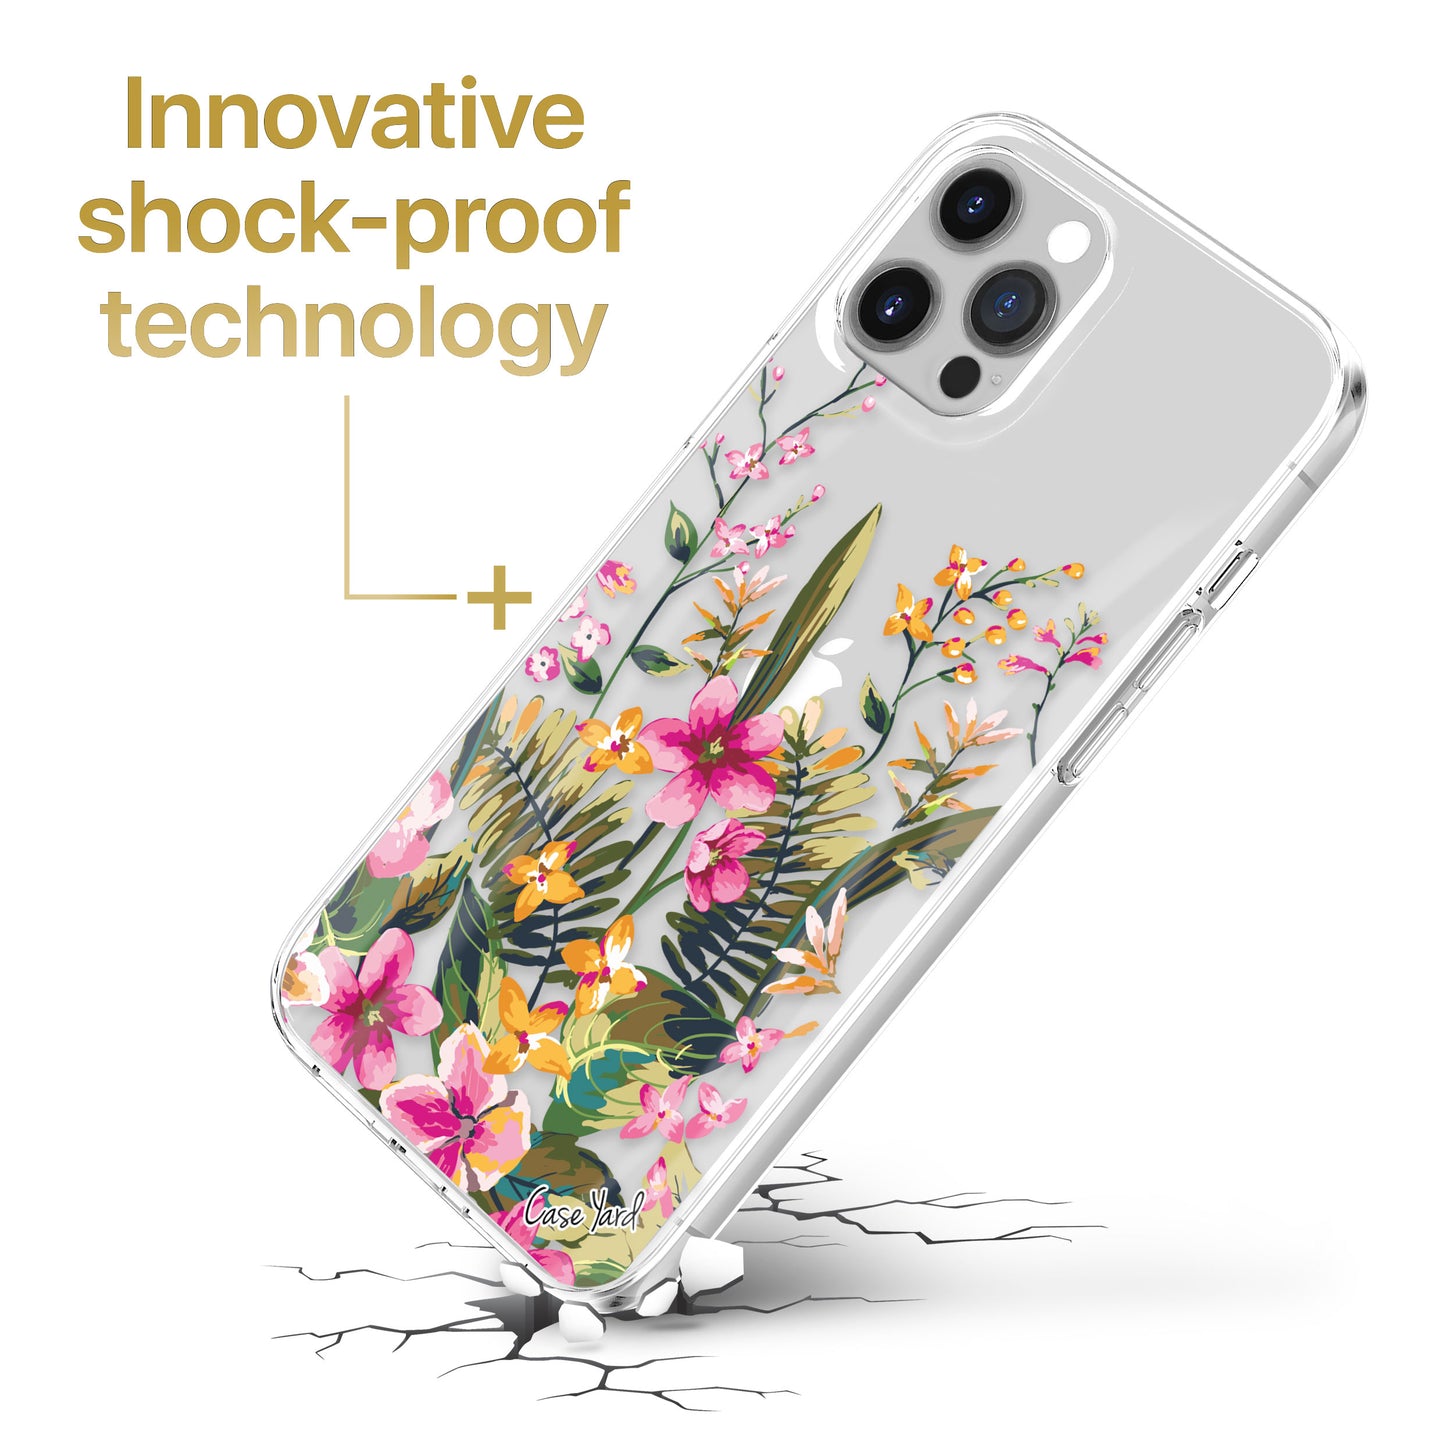 TPU Case Clear case with (Blossom Flower) Design for iPhone & Samsung Phones